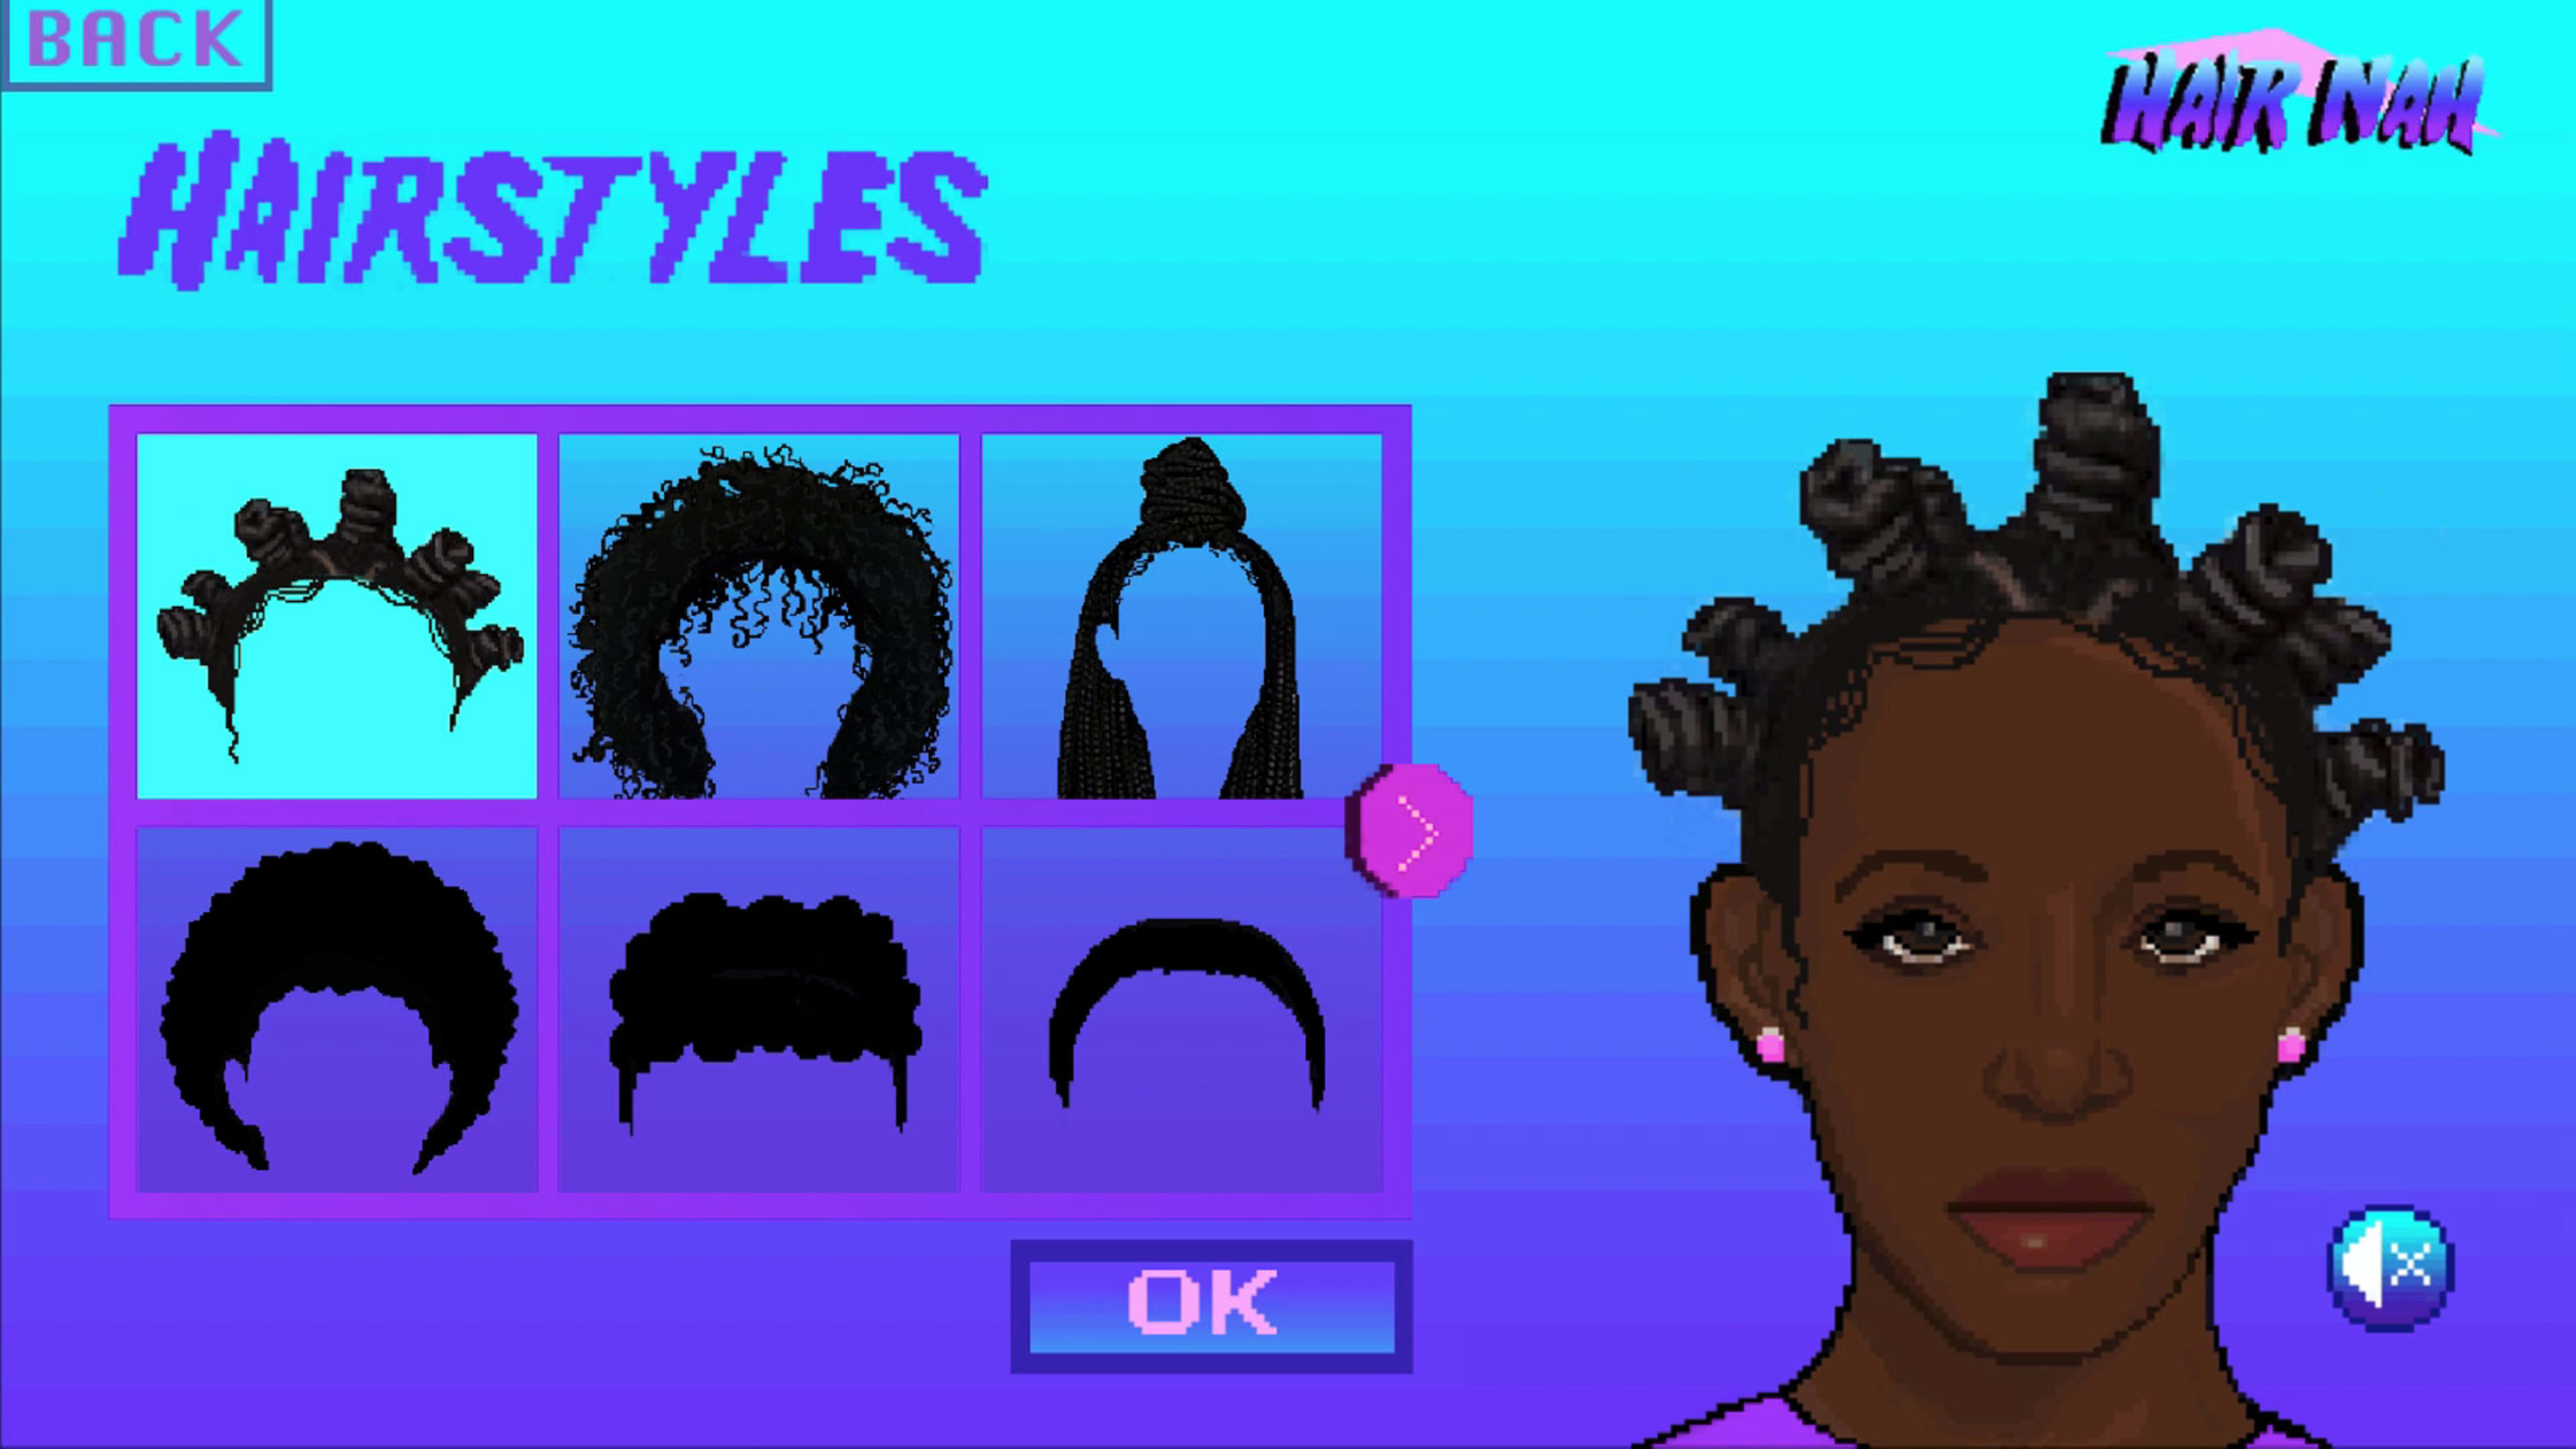 Tired Of White People Touching Your Hair? There’s A Game For That